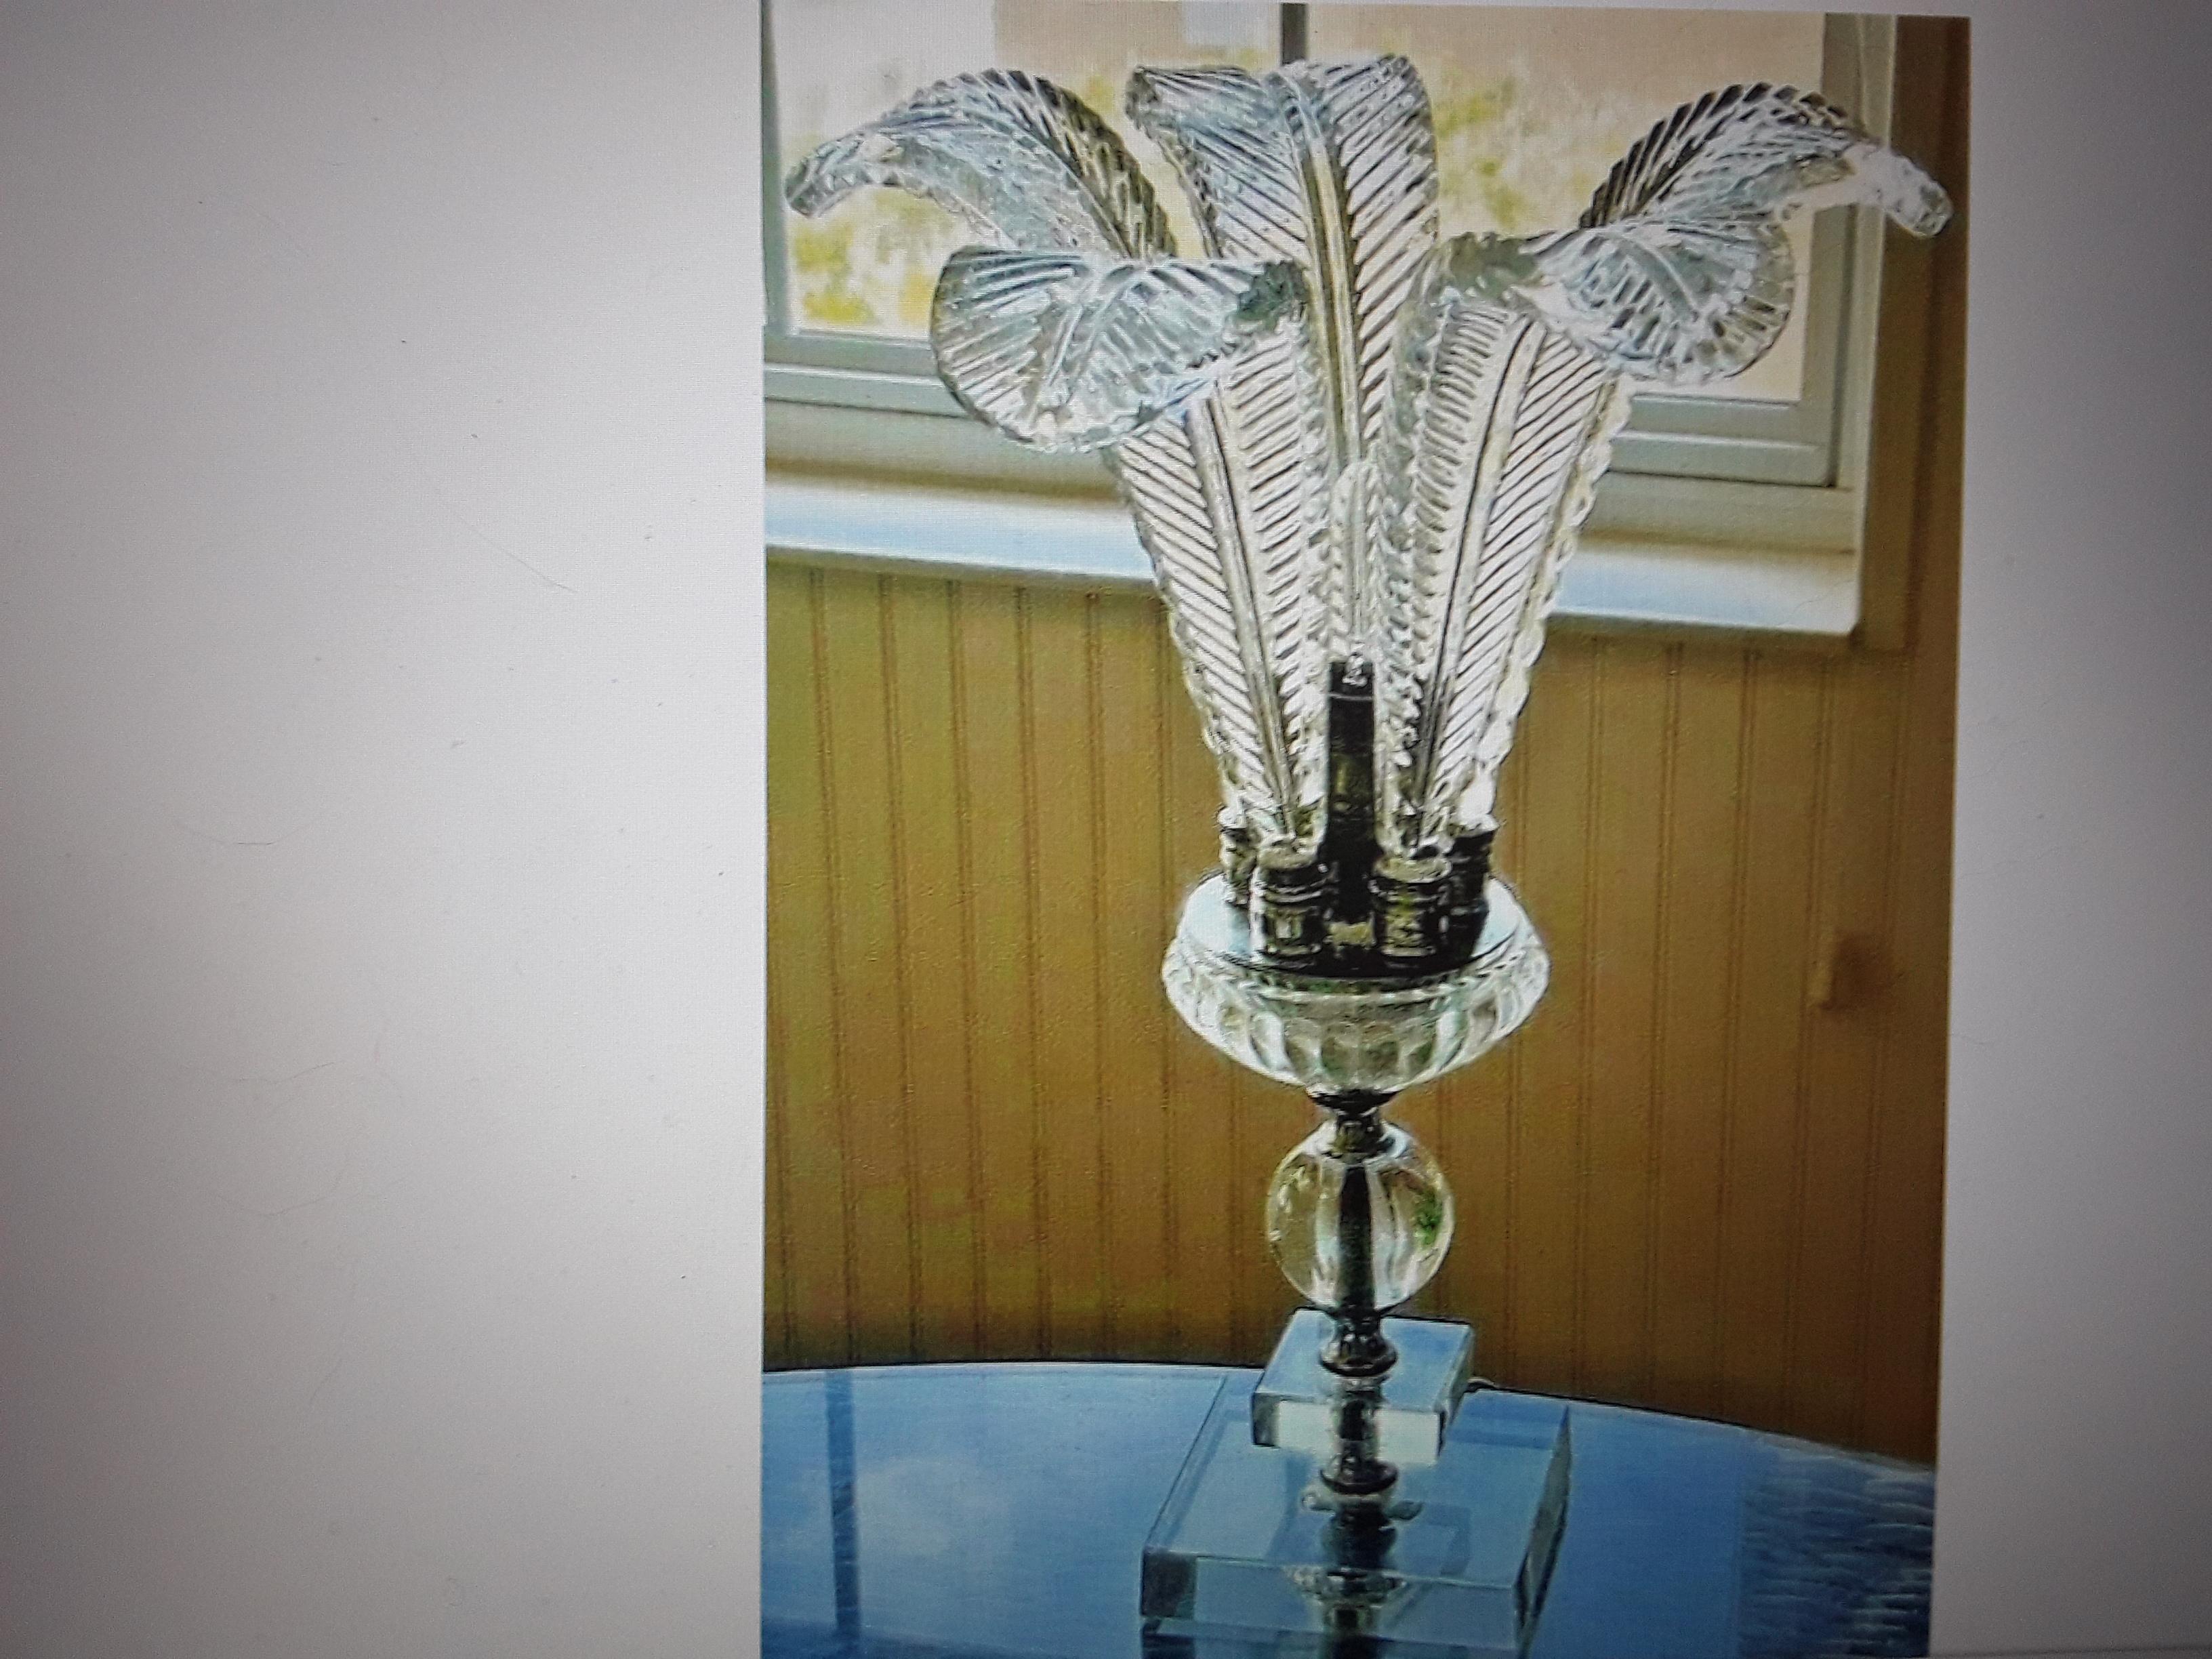 Beautiful Hollywood Regency Crystal Plume Feather Table Lamp. Very nice condition on this collectable Regency lamp.